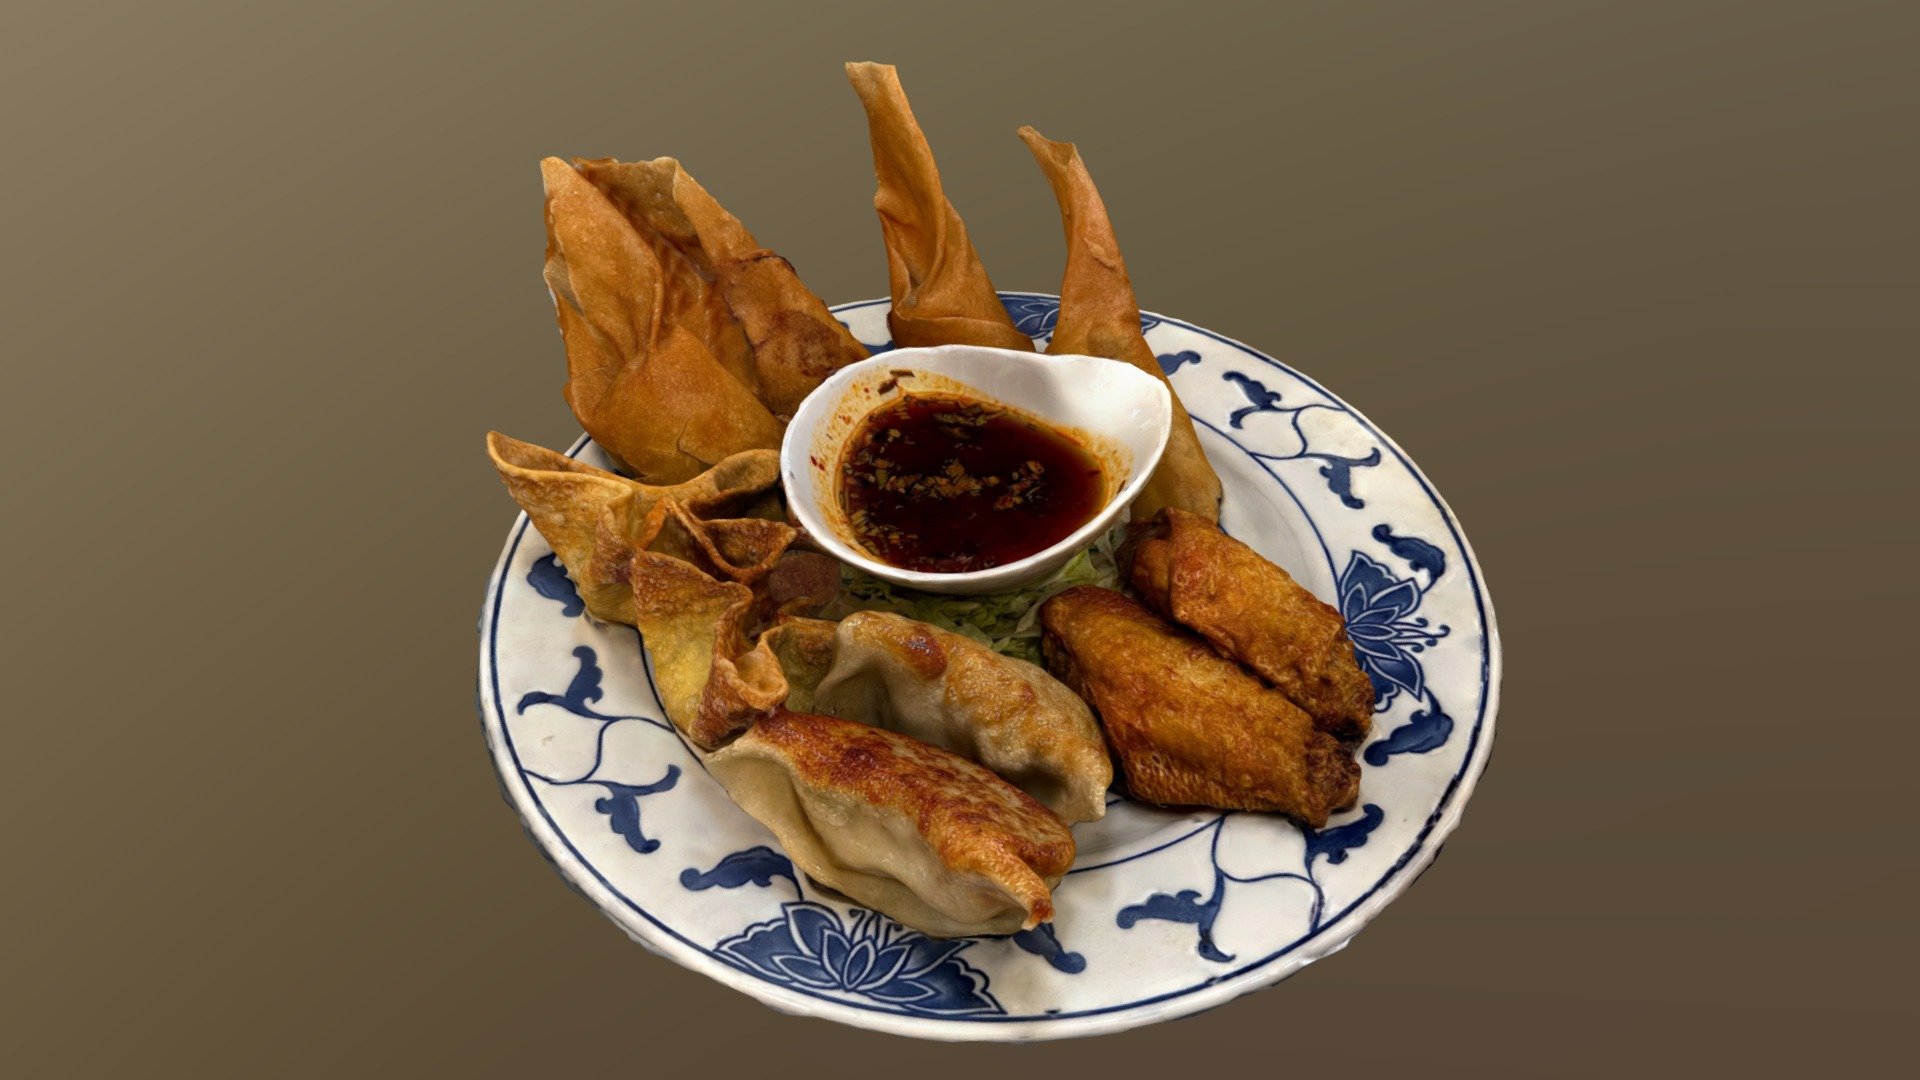 Emma's

Boldly Redefined Asian Cuisine
Driven by modern culinary technique and Northern California influence

817 Francisco Blvd W, San Rafael, CA 94901 - Emma's Sampler Platter - 3D model by Augmented Reality Marketing Solutions LLC (@AugRealMarketing) 3d model